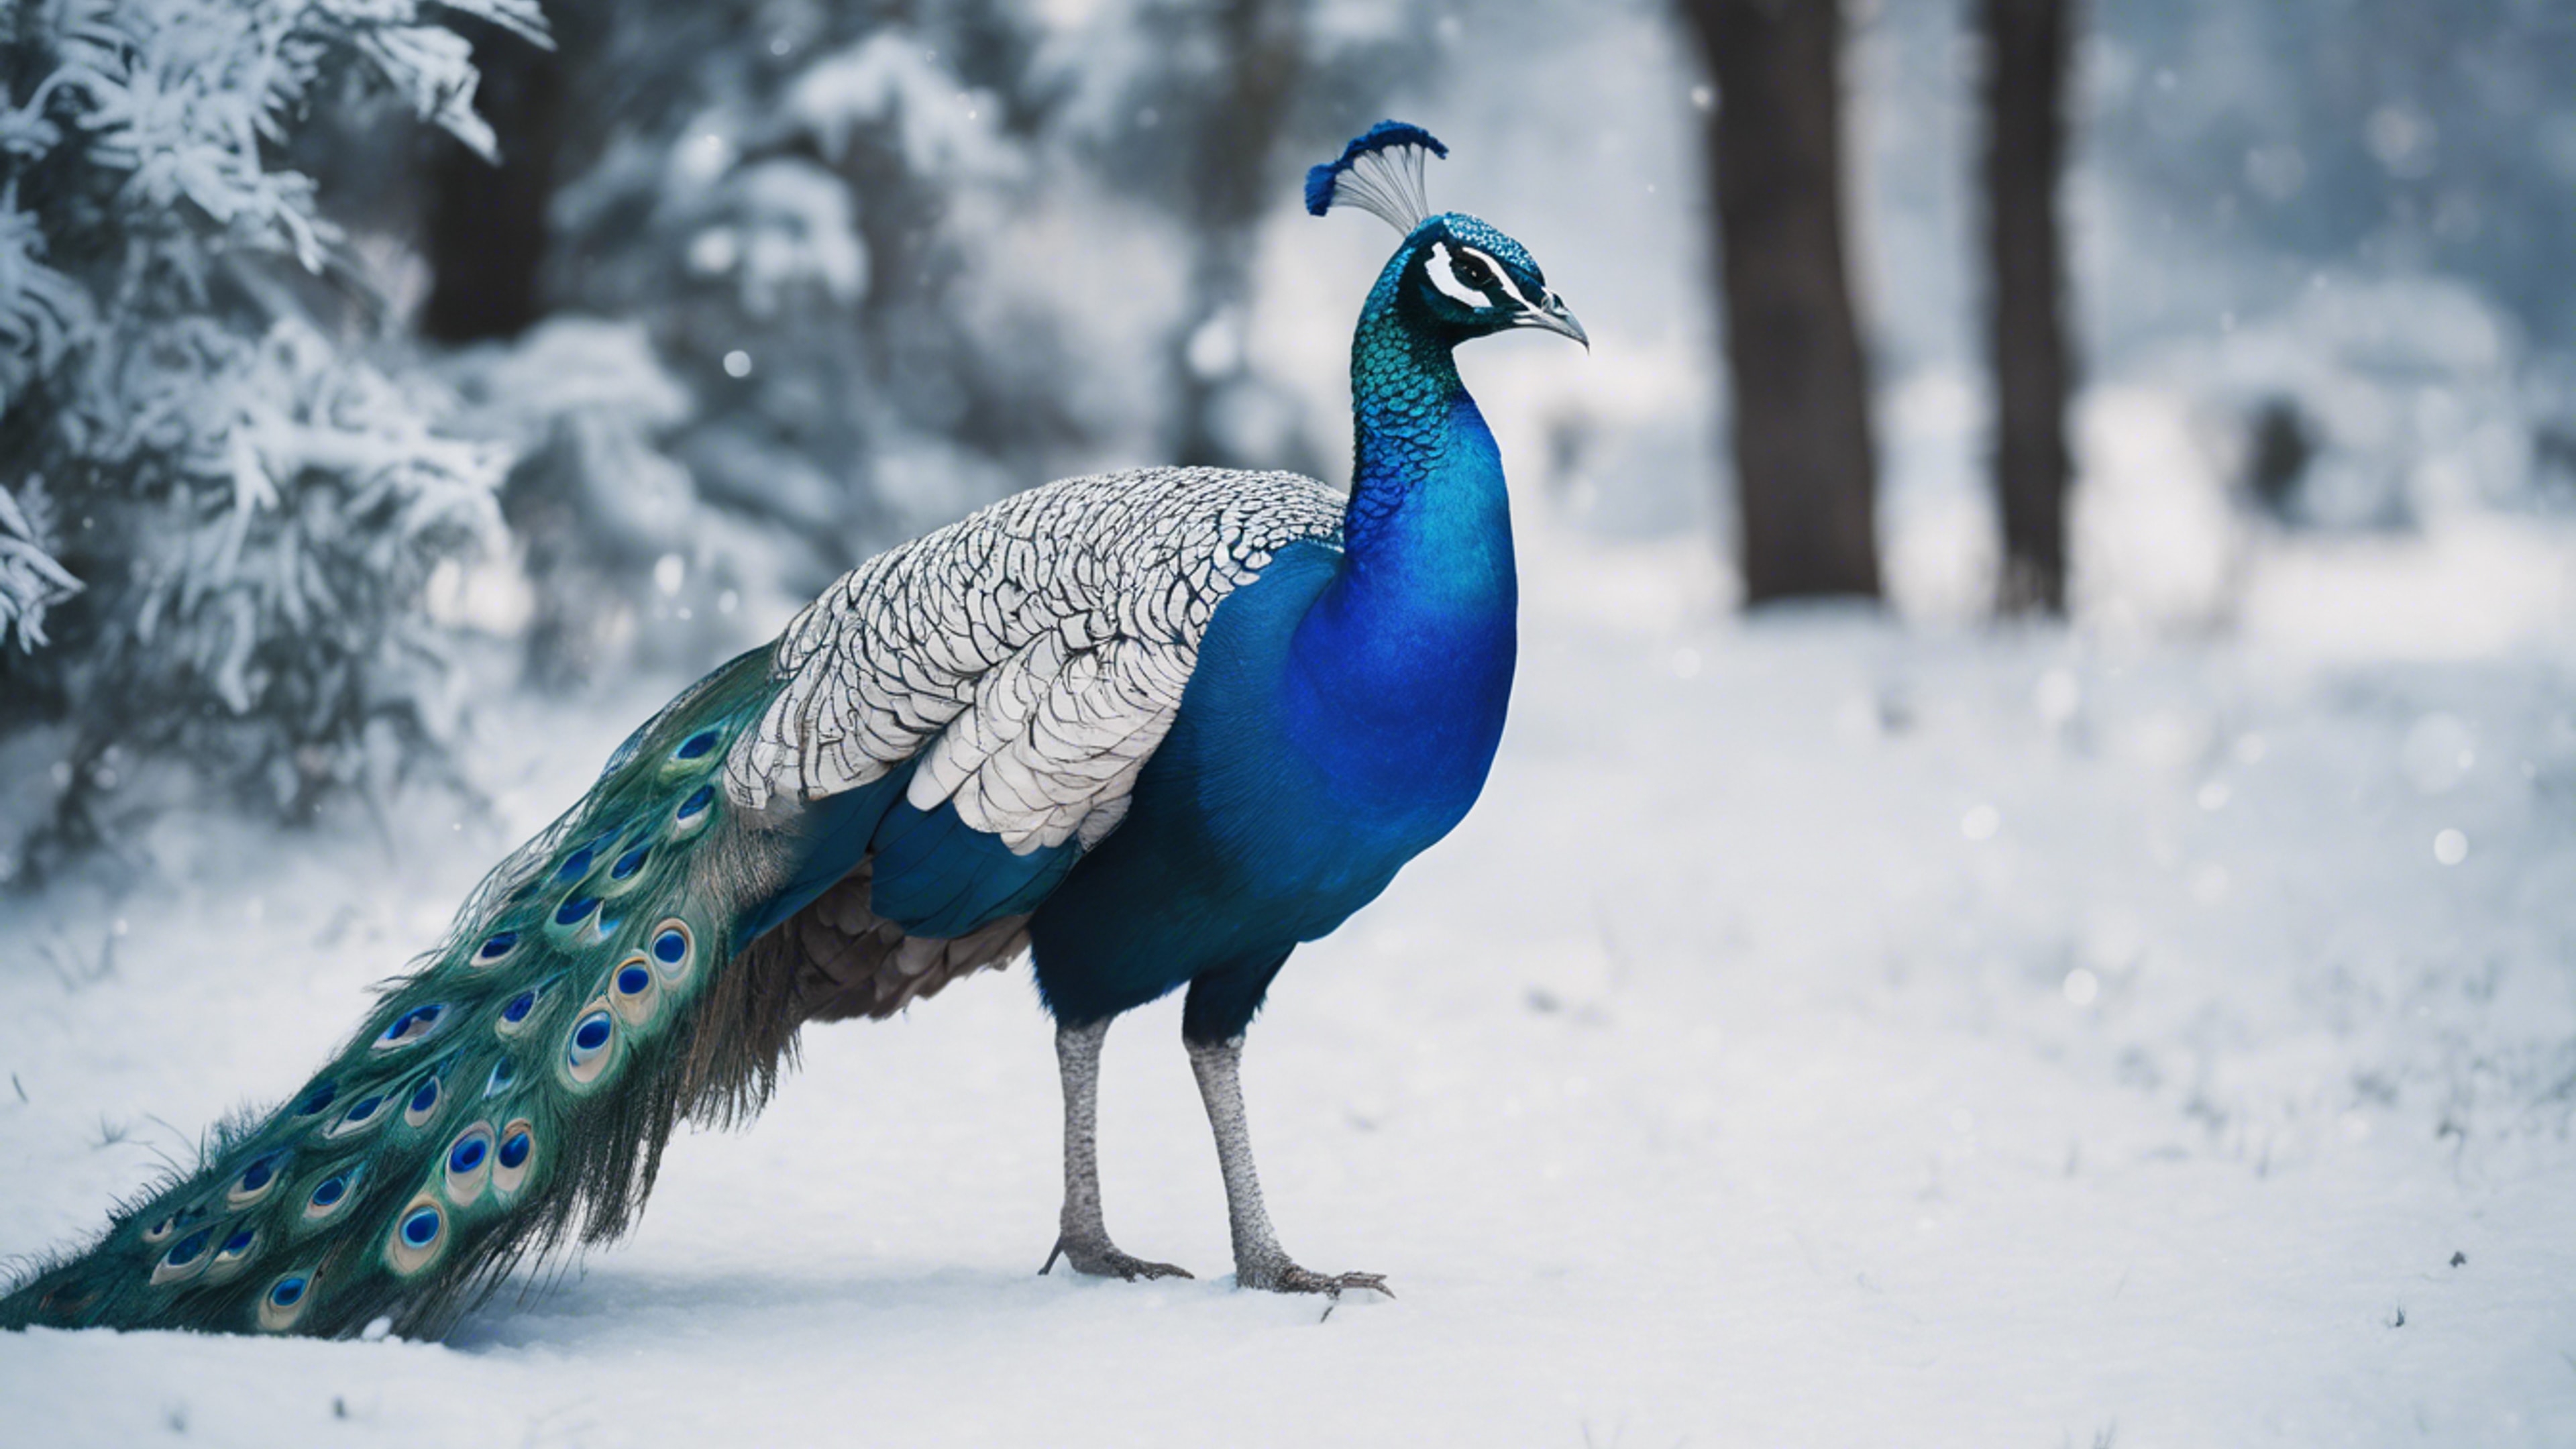 An azure blue peacock with a stunning white crest roaming in a winter wonderland. Валлпапер[75d8e926bbf547baa433]